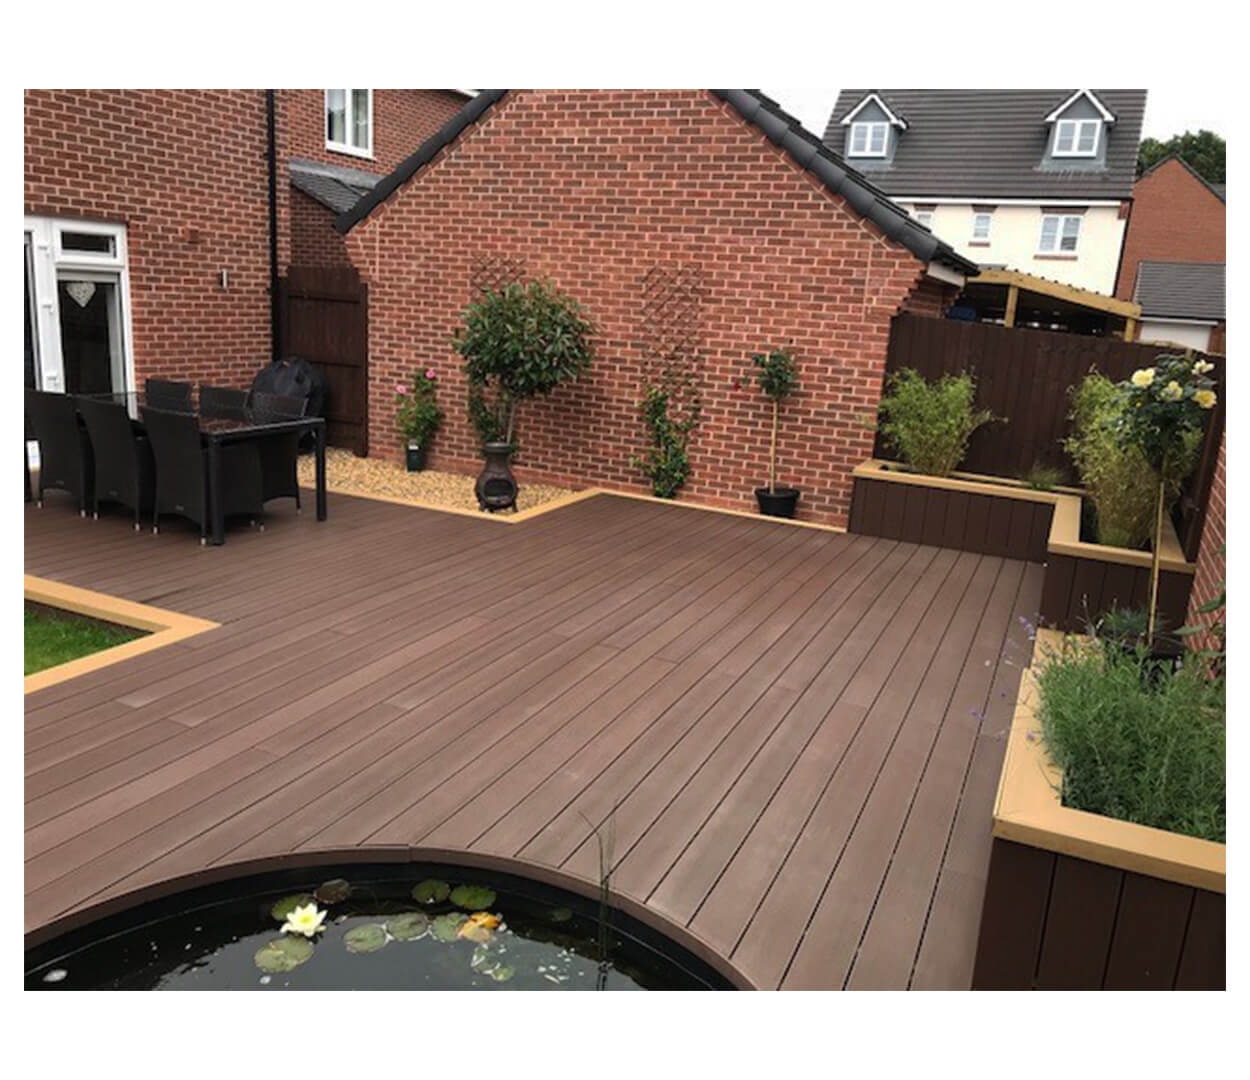 Cladco Composite Decking Boards in Coffee with Teak Edging Trim